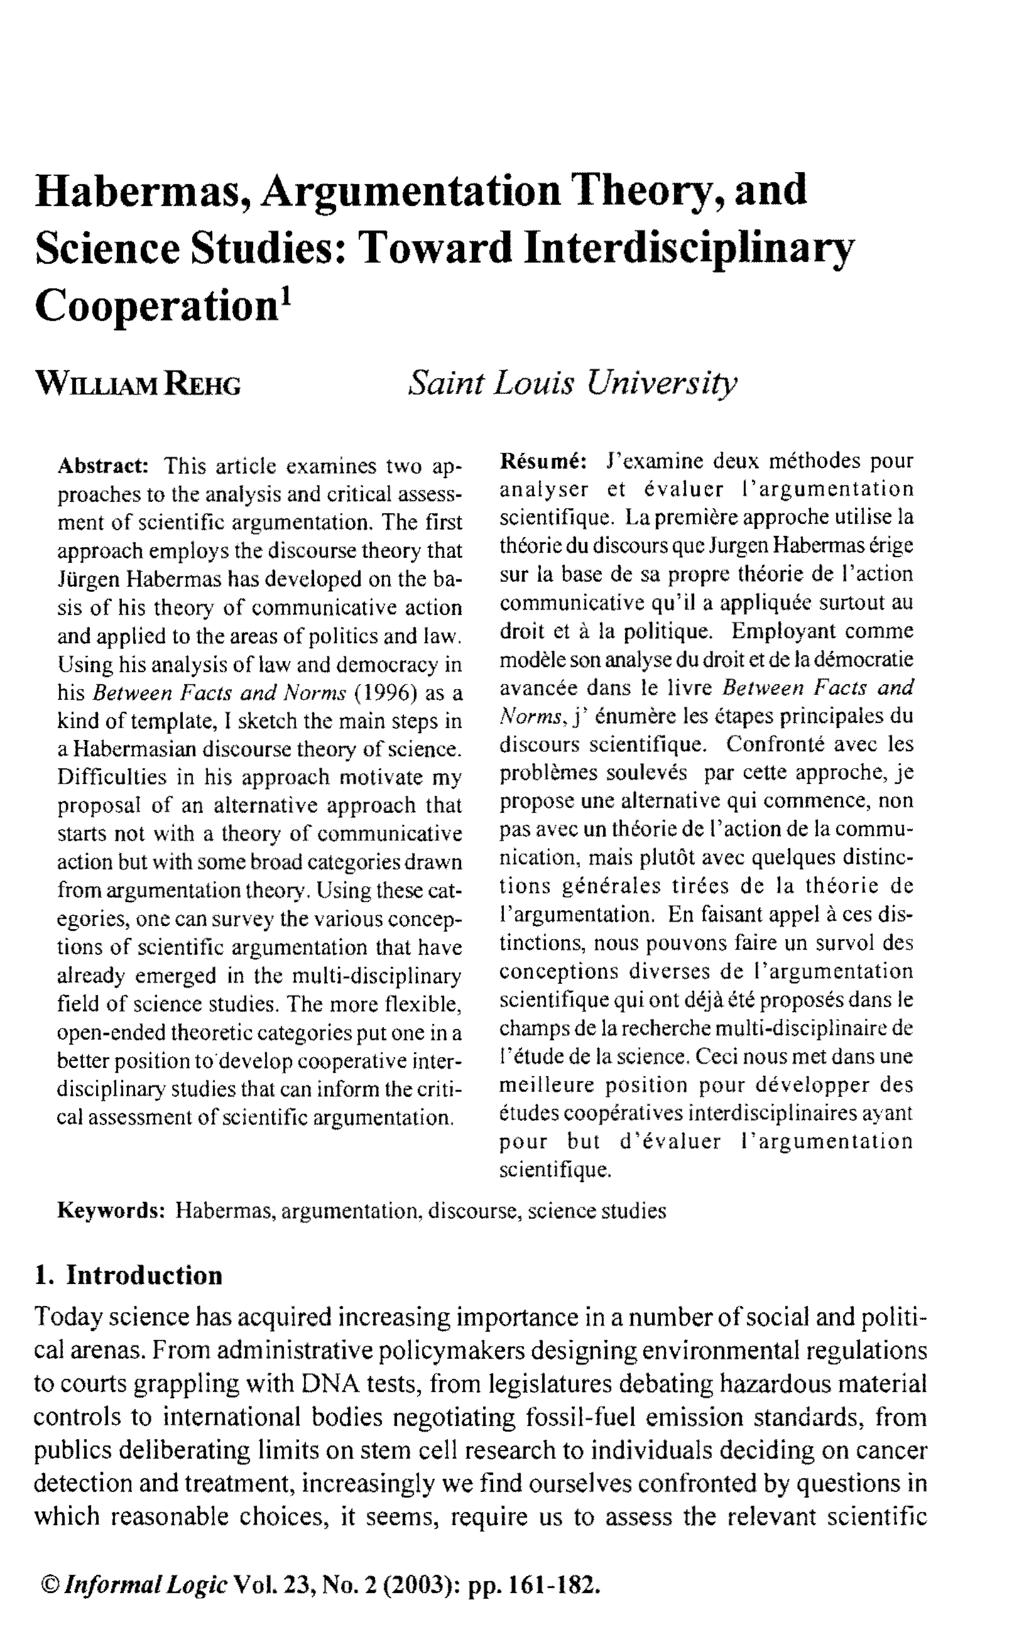 Habermas, Argumentation Theory, and Science Studies: Toward Interdisciplinary Cooperation l WILLIAM REHG Saint Louis University Abstract: This article examines two approaches to the analysis and